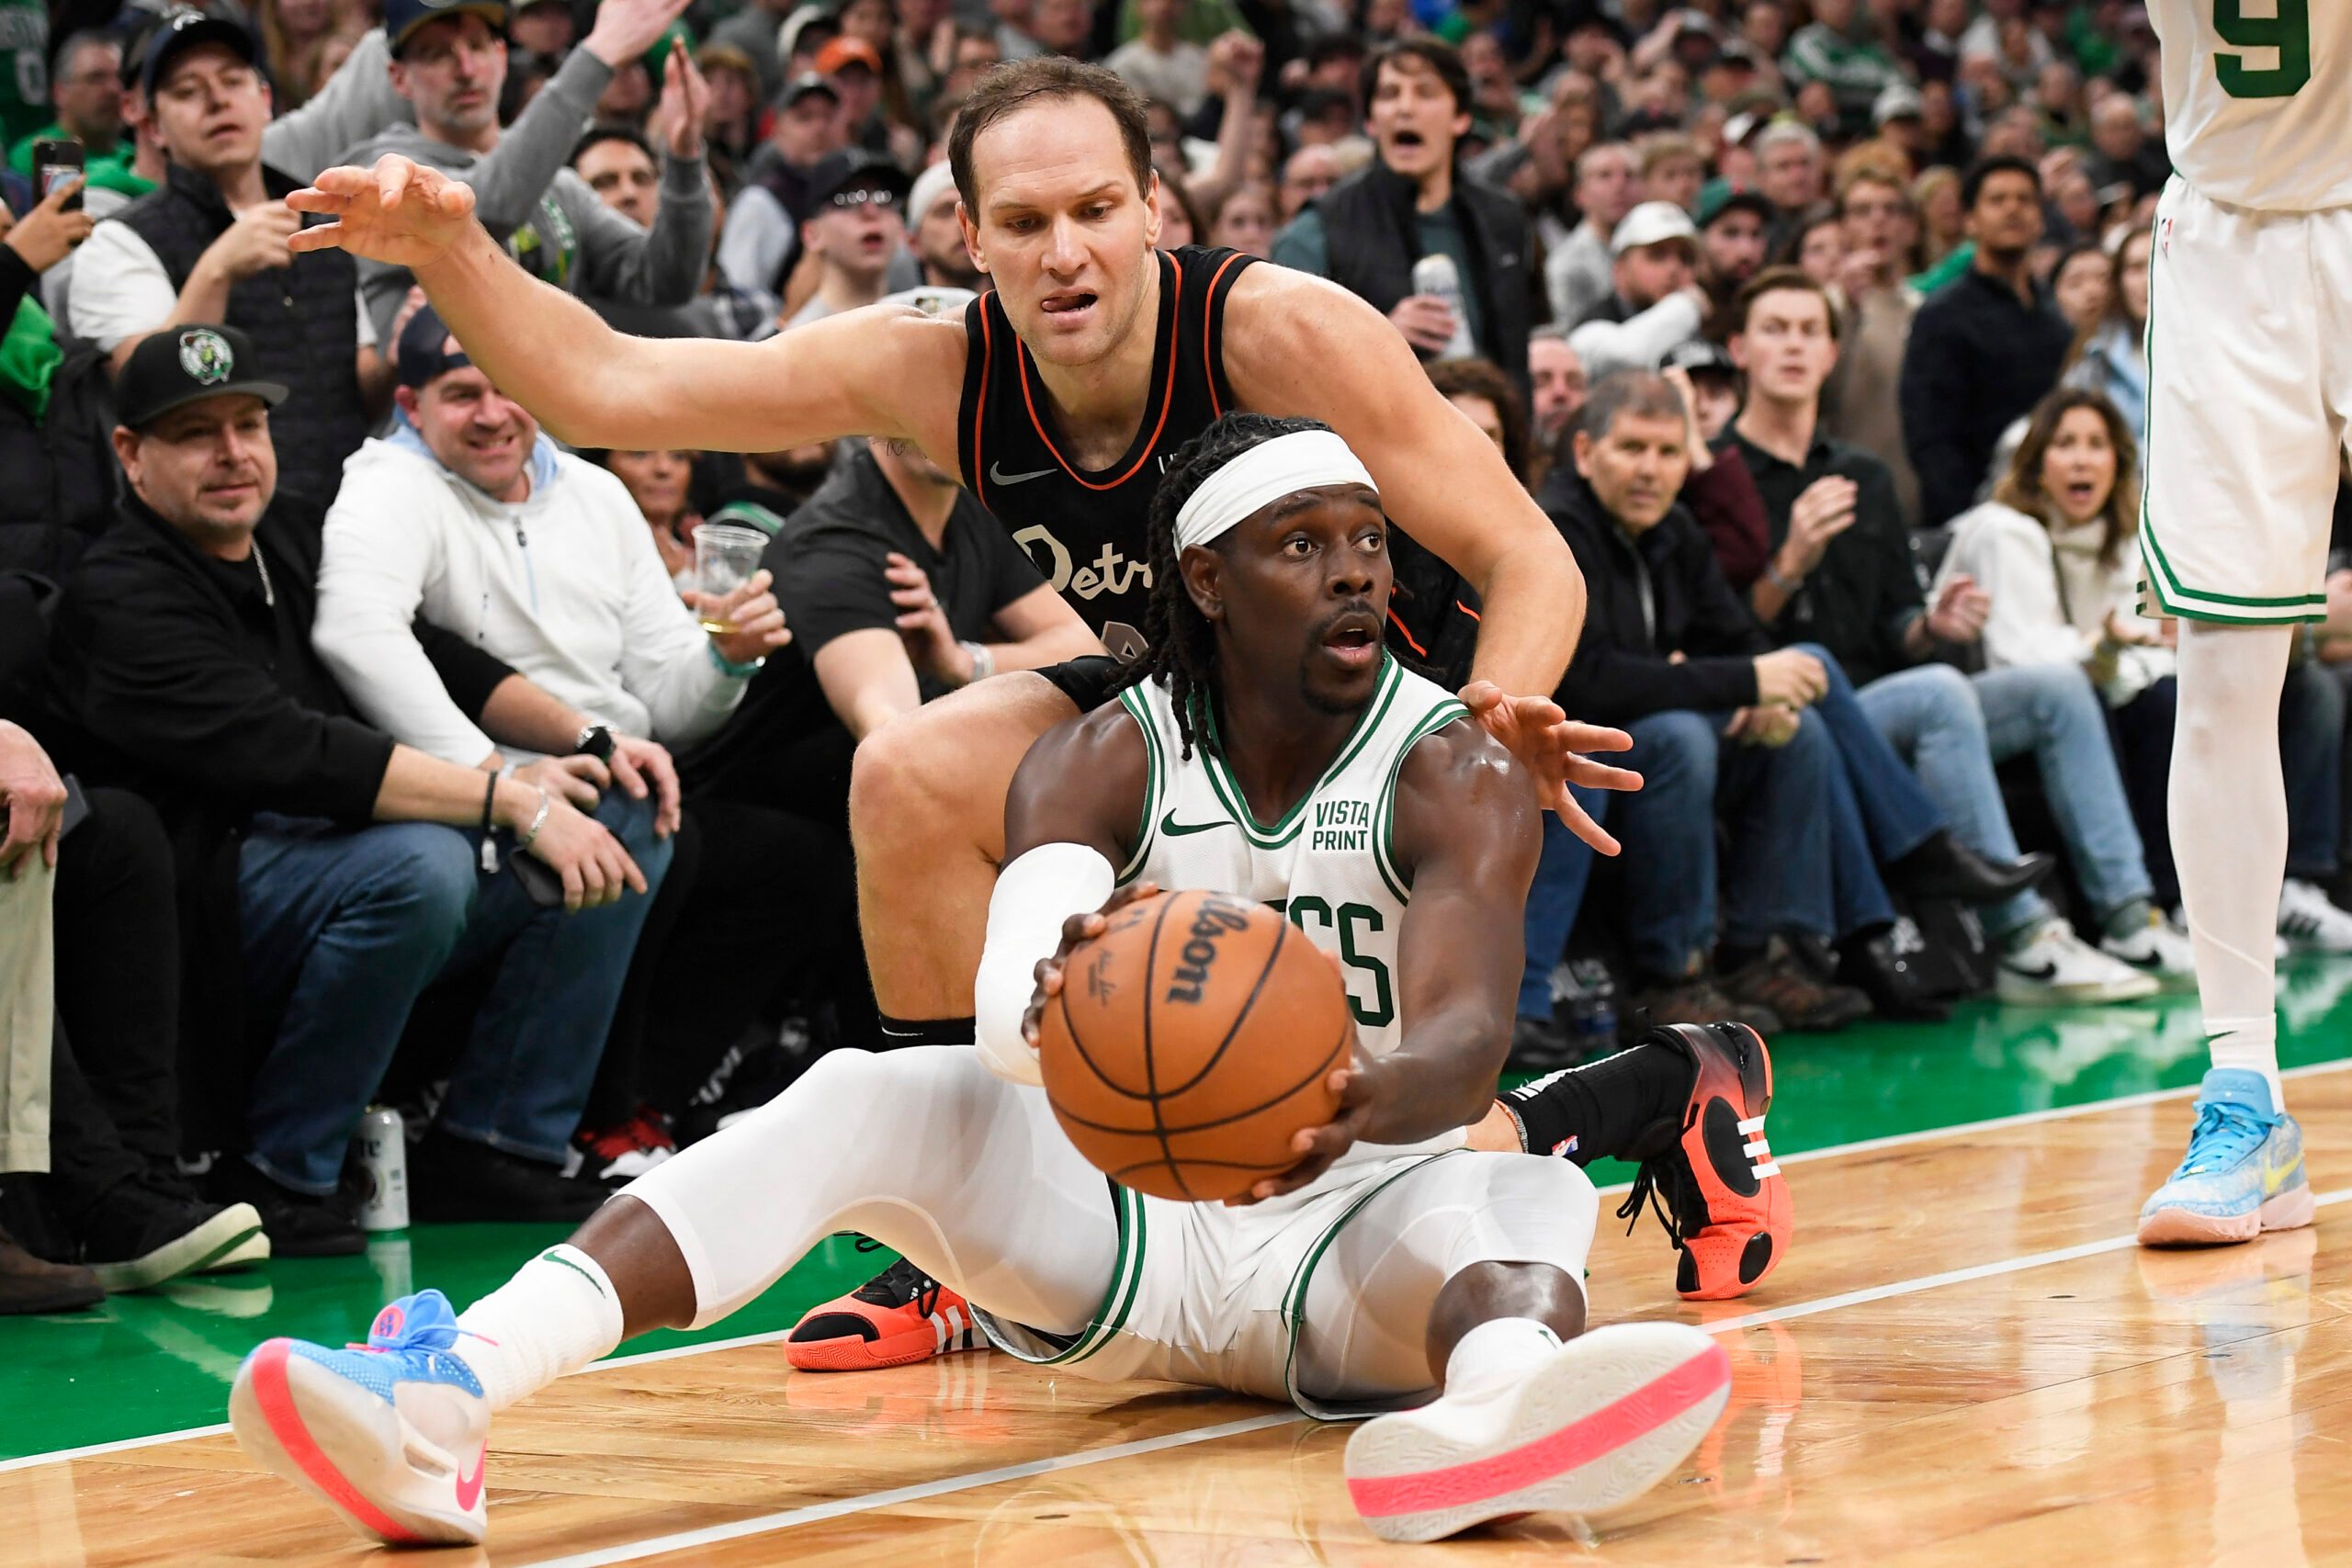 Down 21 points, Celtics rally in overtime to deal Pistons 28th straight loss